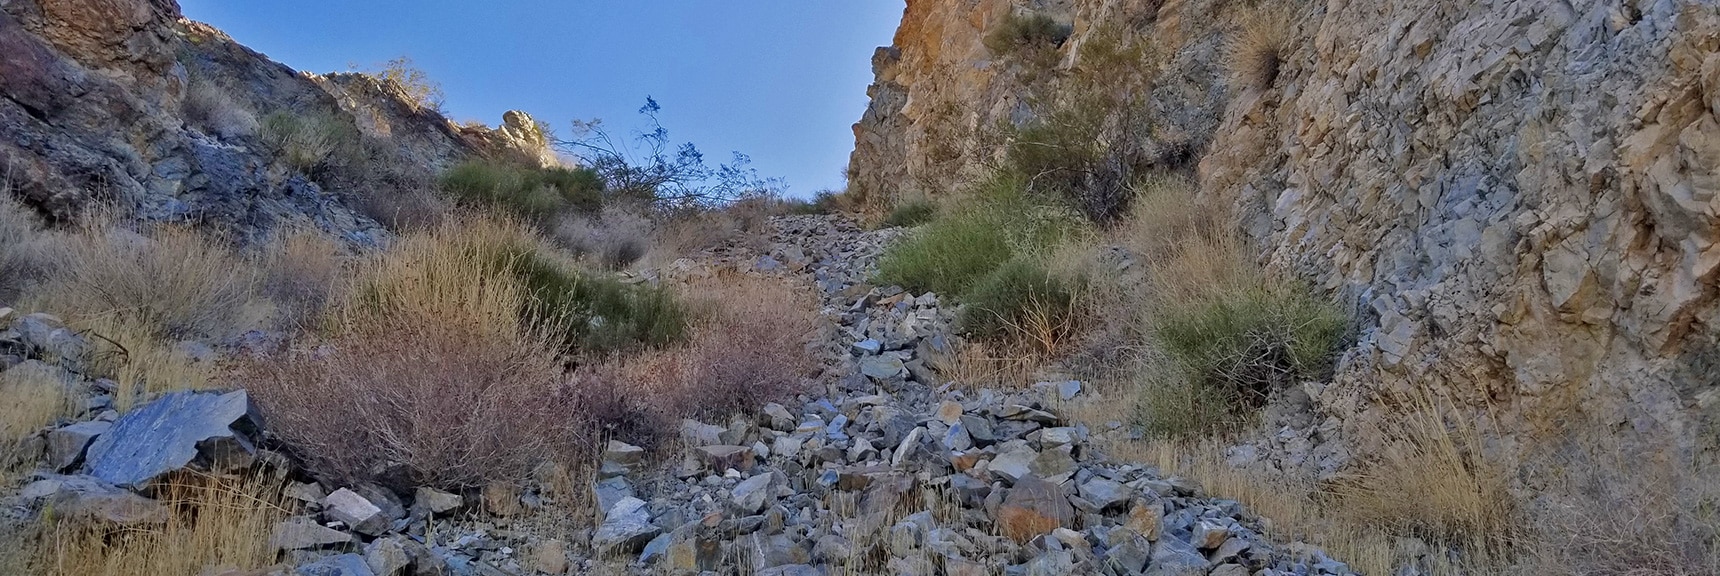 3rd Canyon to the Right. Loose Rock Avalanche Slope Nicknamed "The Bowling Alley" | Mt Wilson, Black Mountains, Arizona, Lake Mead National Recreation Area